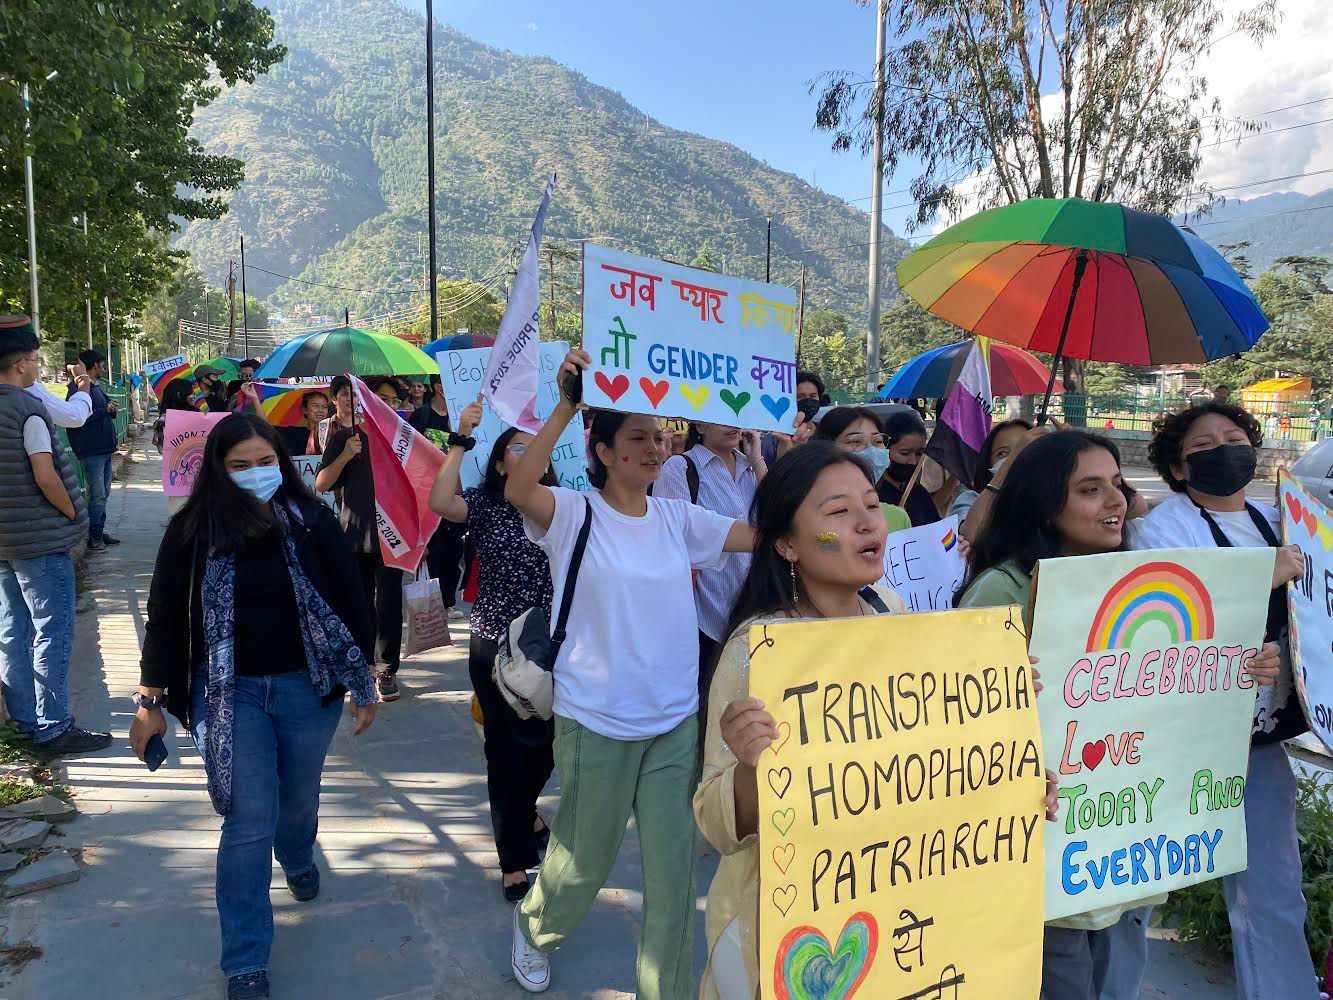 The Himachal Queer Foundation frequently conducts pride walks in towns across the state